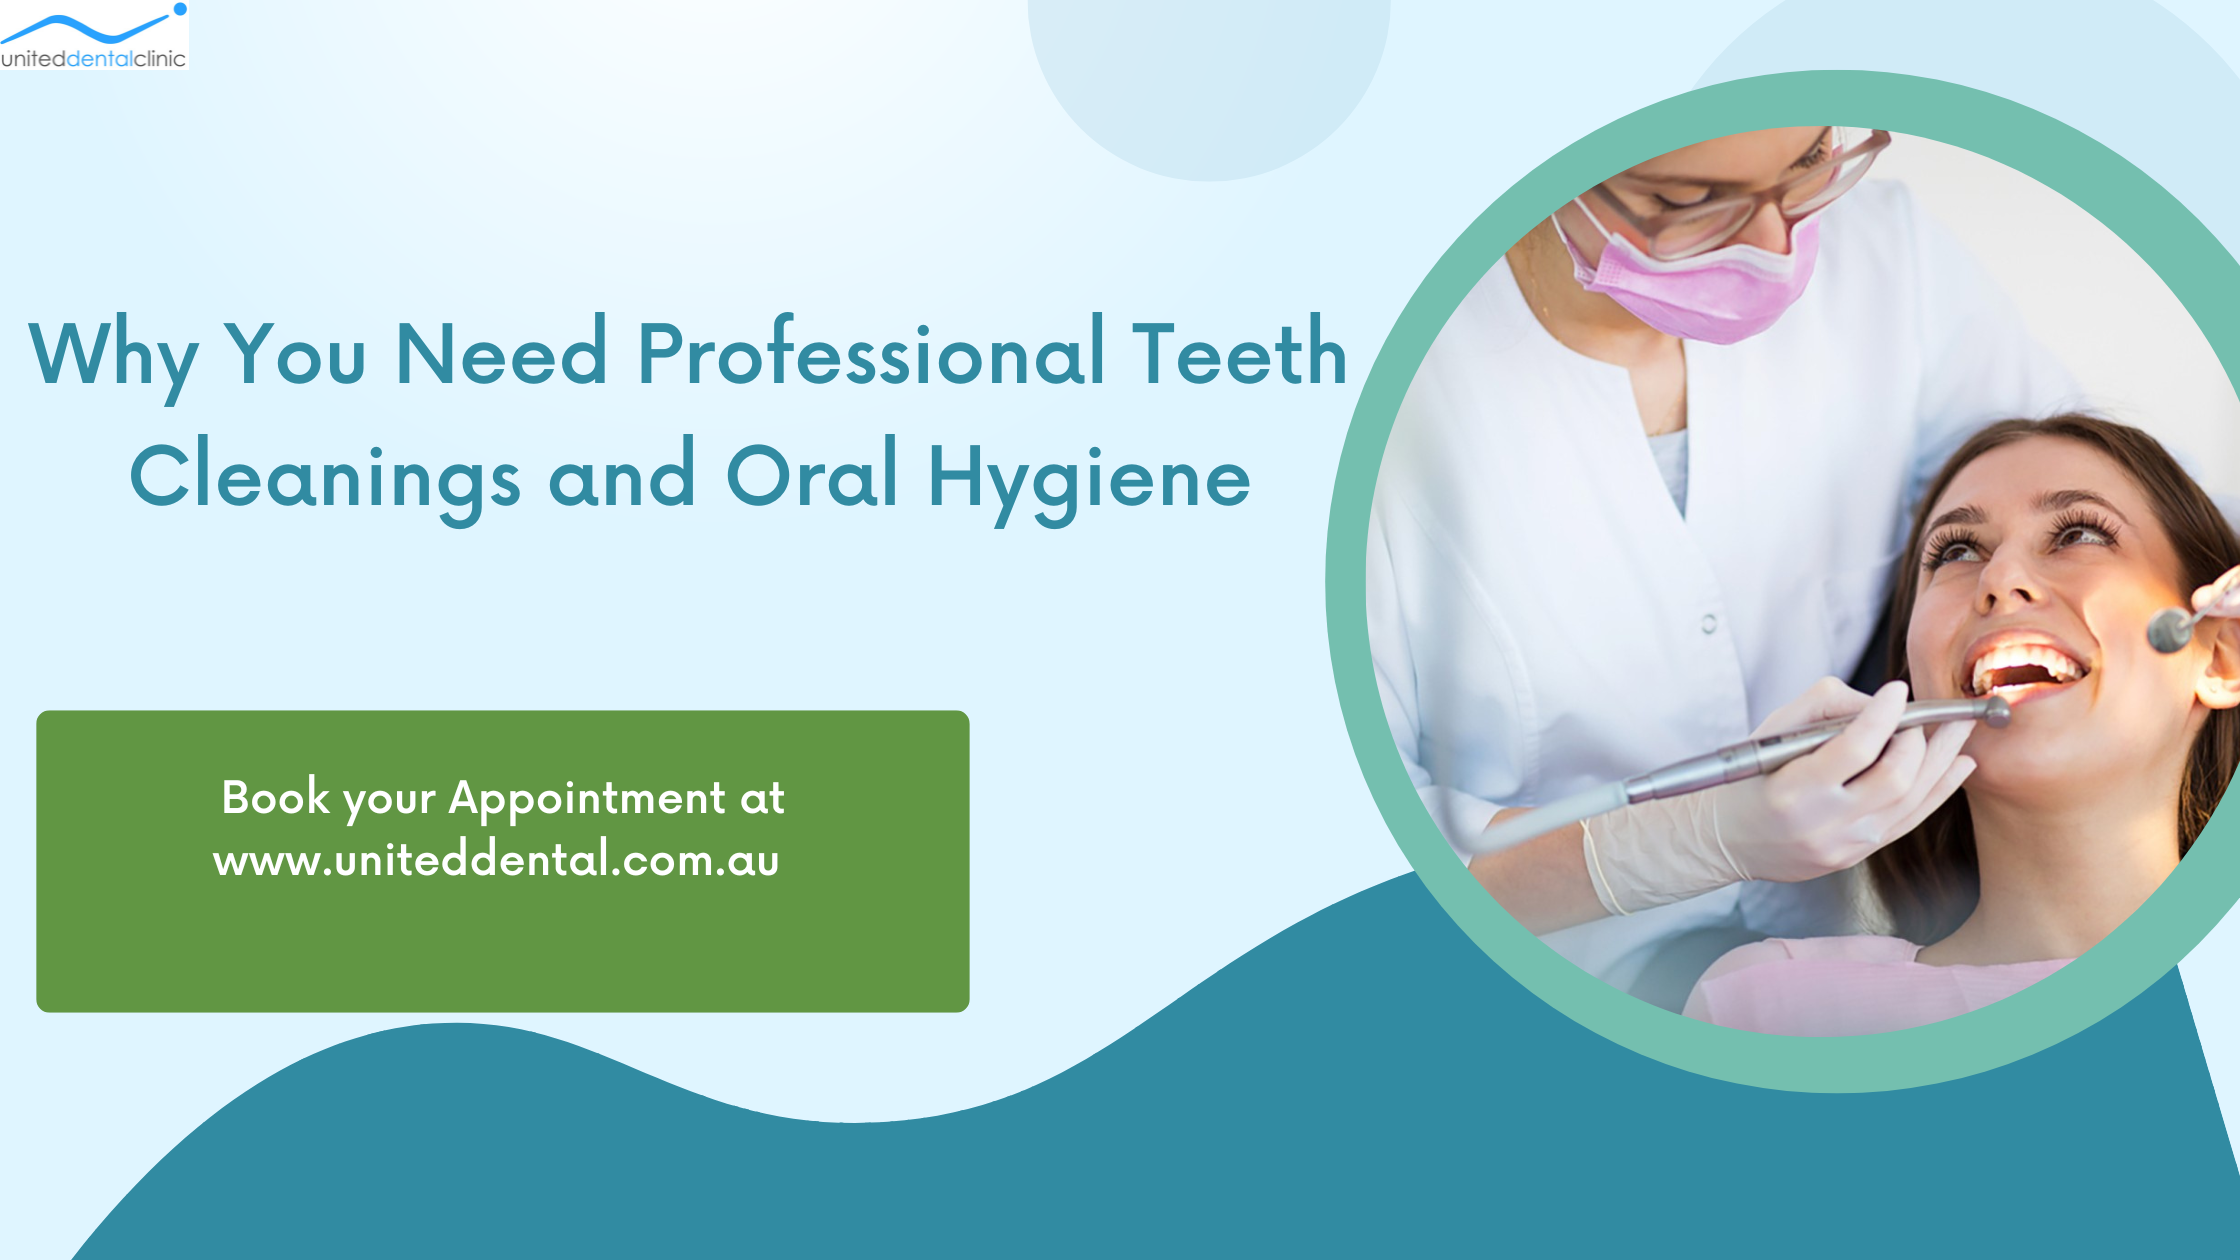 Why You Need Professional Teeth Cleanings and Oral Hygiene